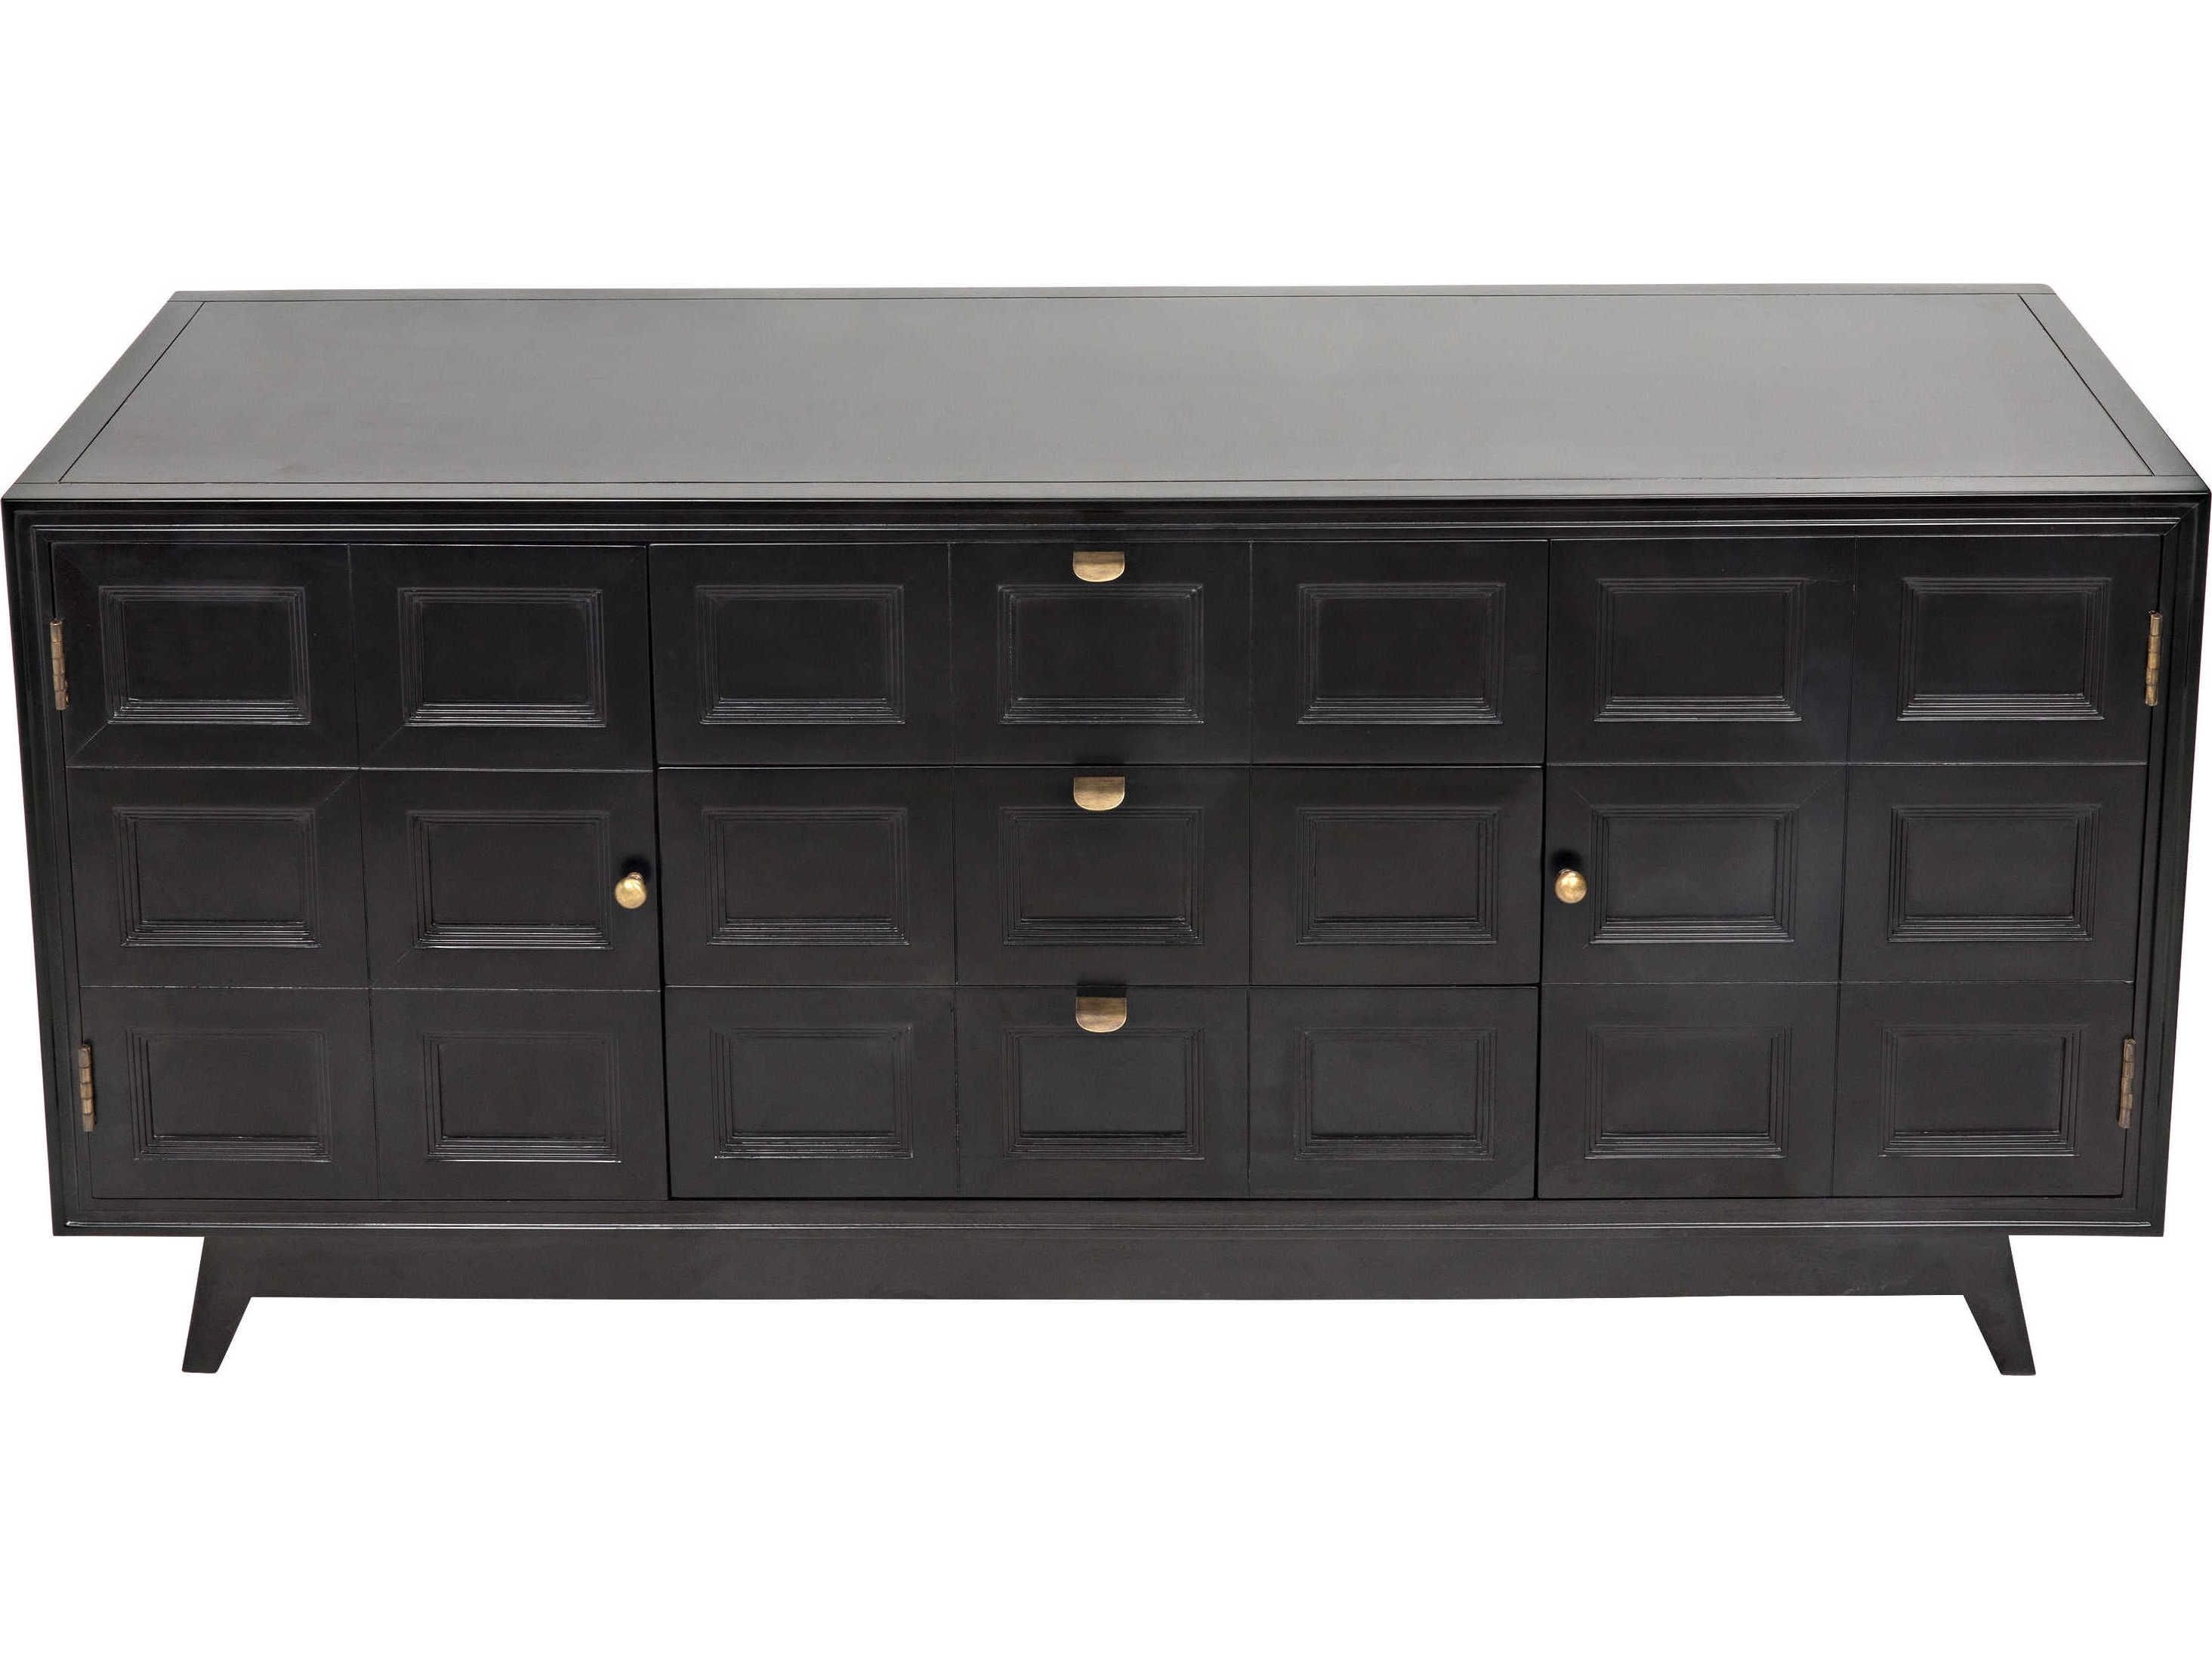 Noir Furniture Wyatt Charcoal 73'' X 23'' Sideboard | Noigcon249ch Intended For Wyatt Sideboards (View 9 of 30)